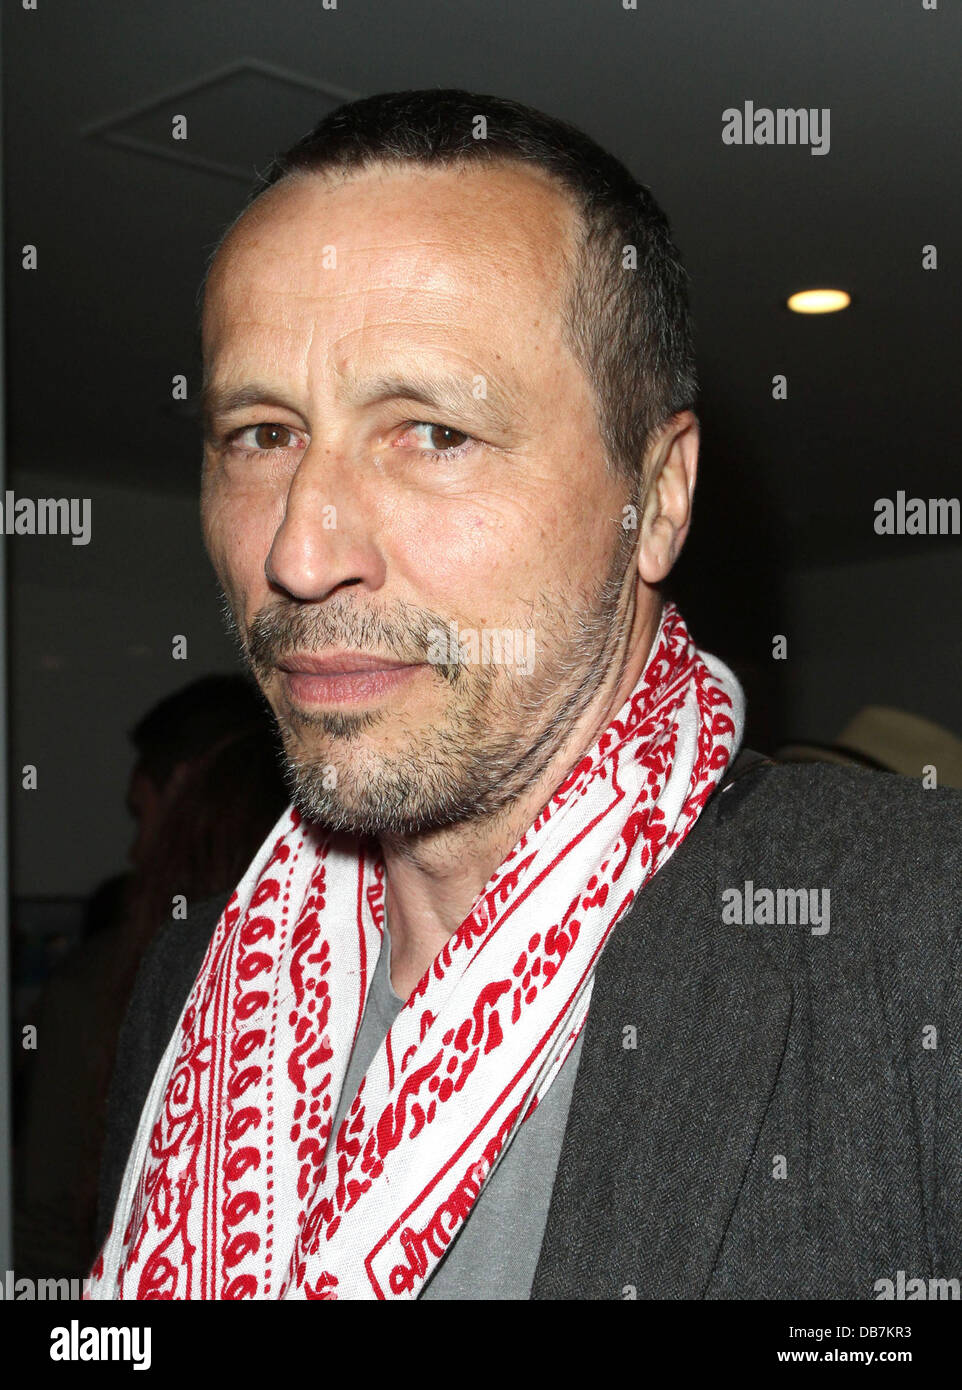 Michael Wincott The grand opening of the new OnePiece store in West Hollywood Los Angeles, California - 12.05.11 Stock Photo